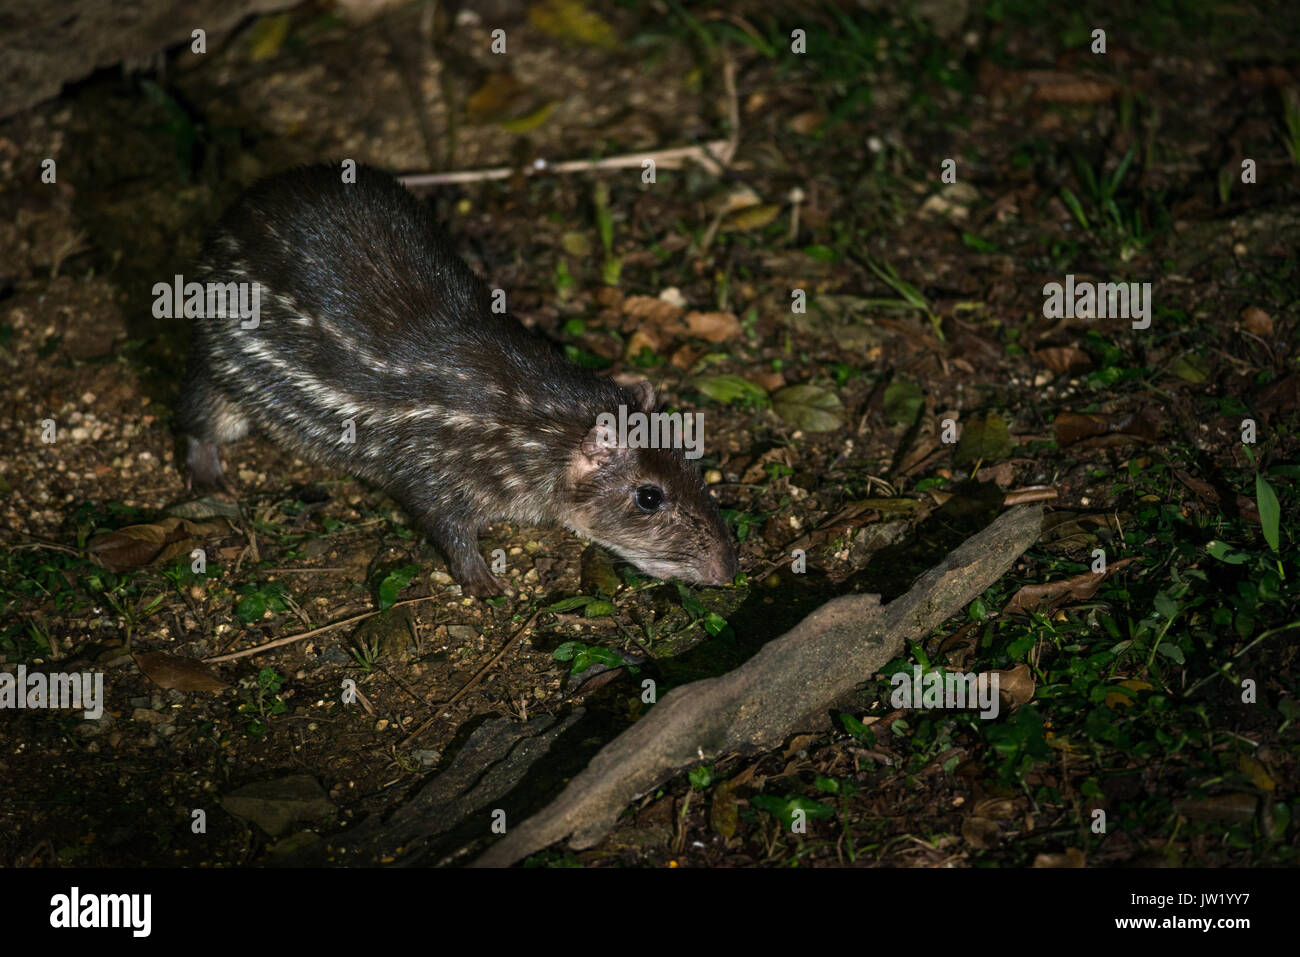 A Paca photographed in the Atlantic Rainforest of Brazil Stock Photo